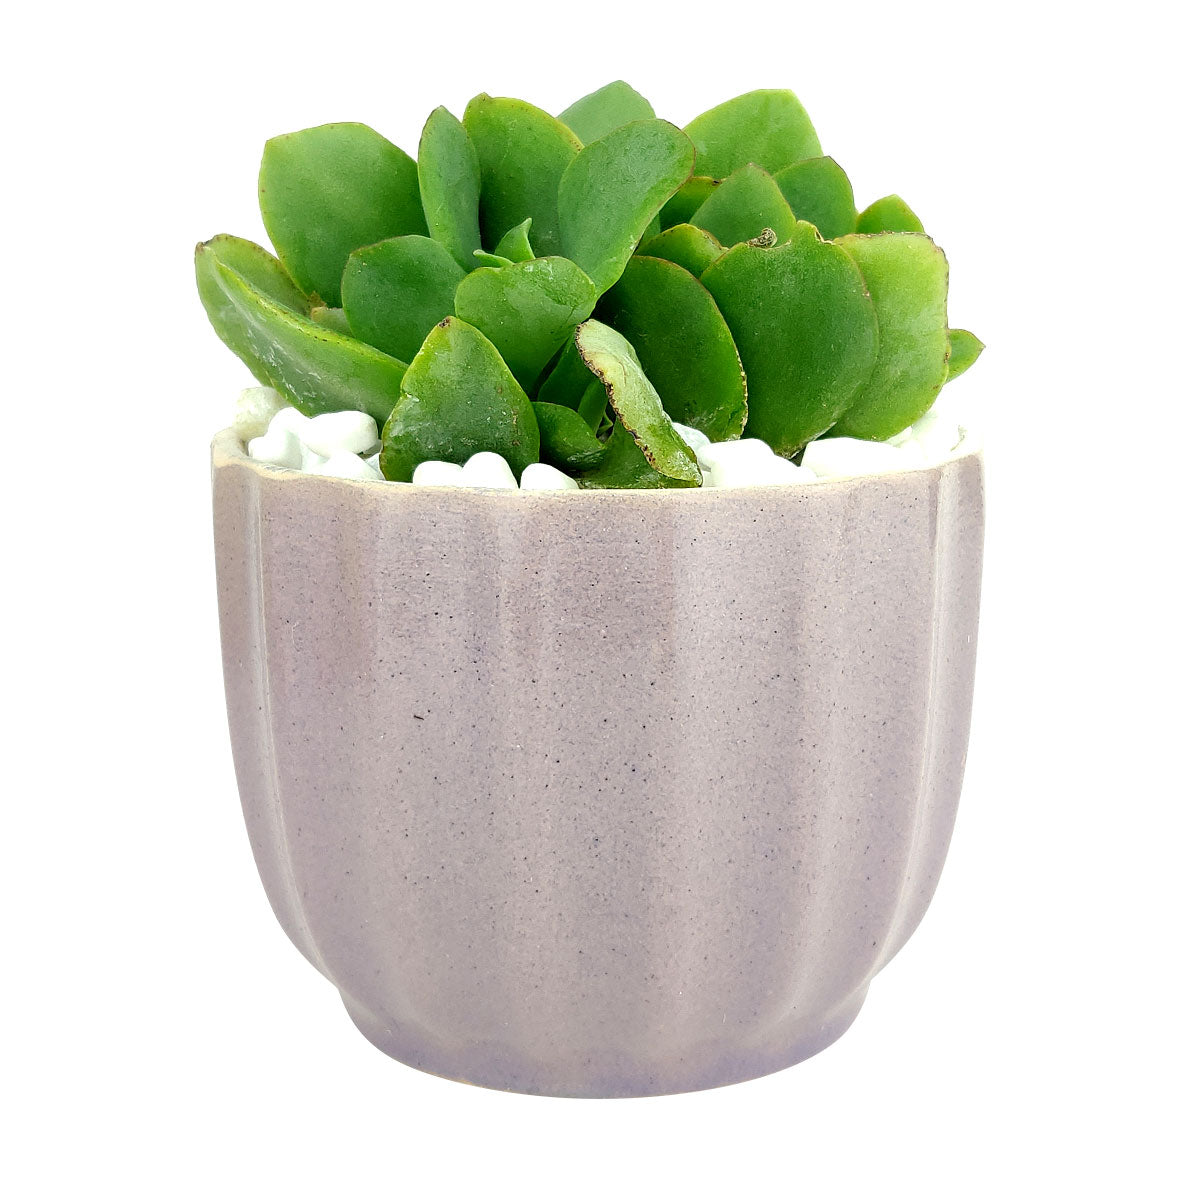 Purple Ripple Pot for sale, Small Ceramic Pot for Succulents and Flowers, Succulent Gift Ideas, Minimalist Style Indoor Plant Pot, Ceramic Planters